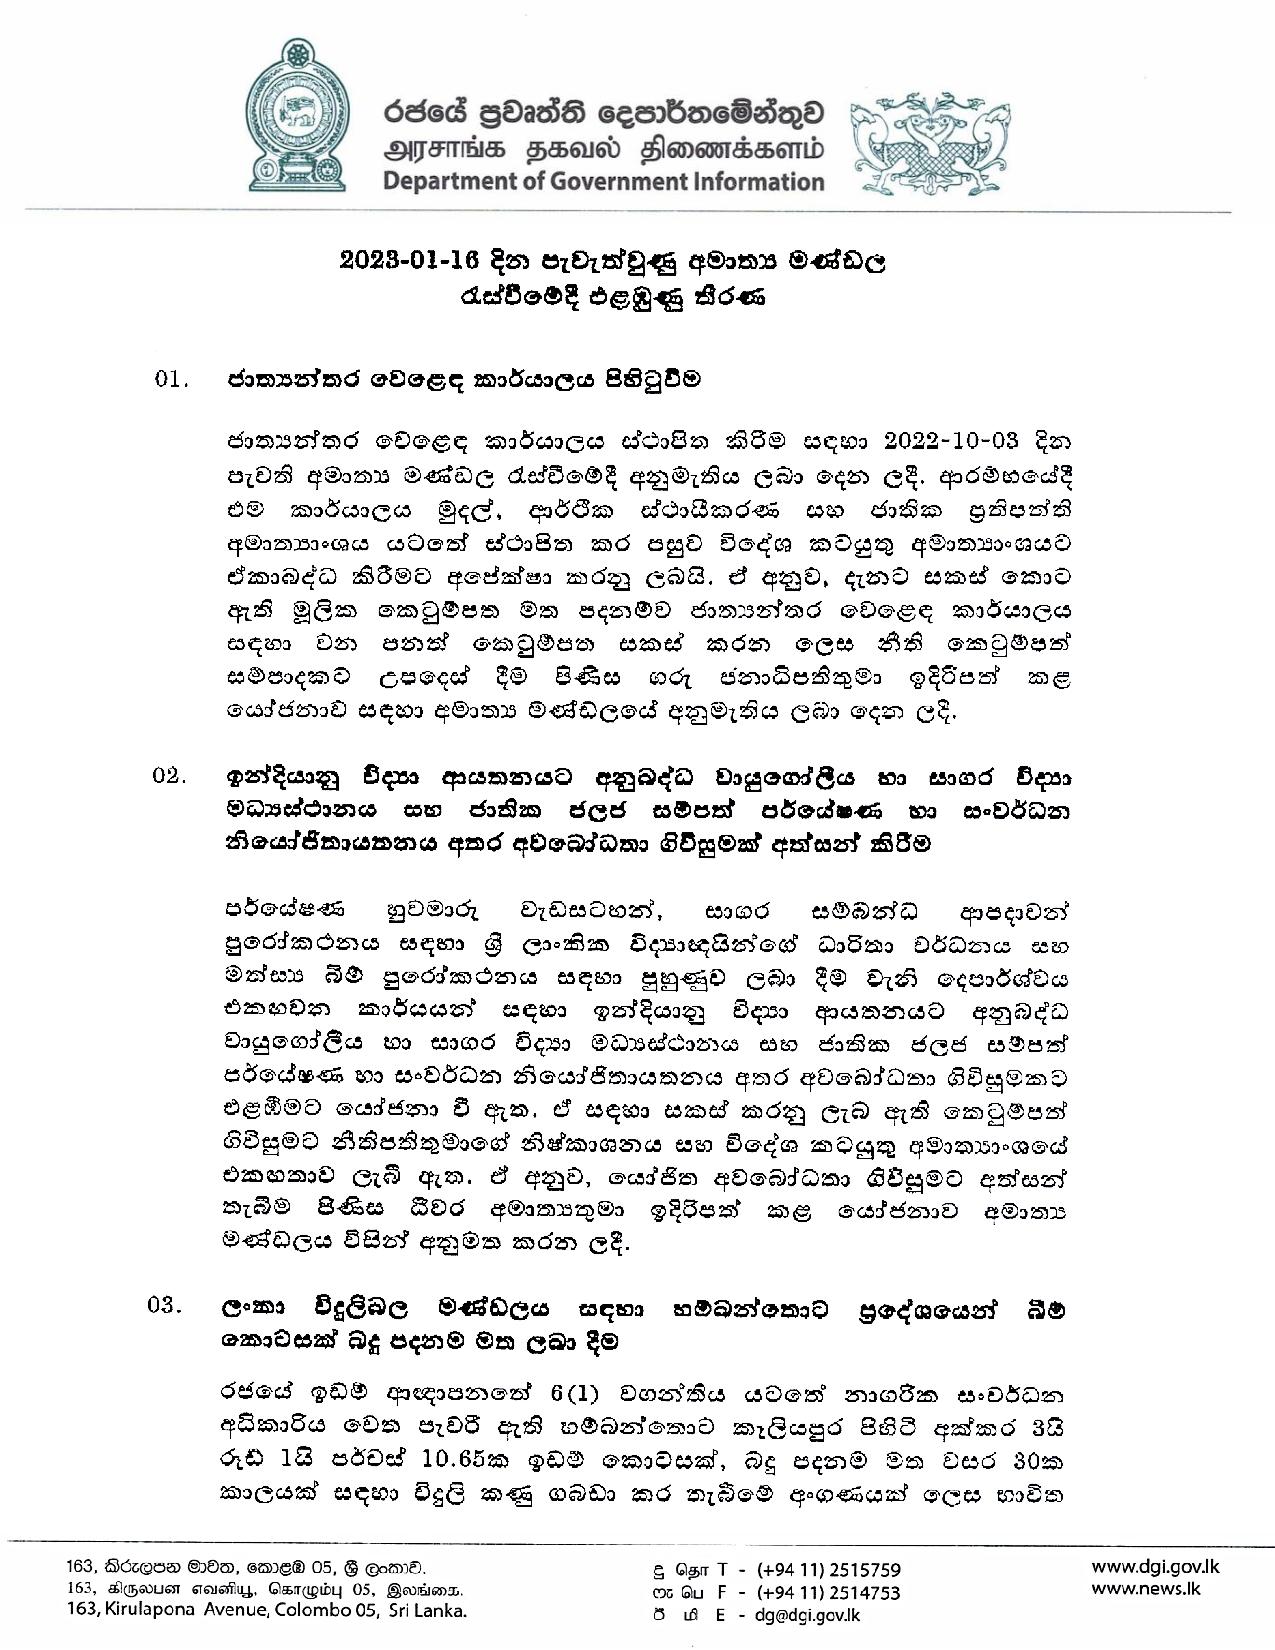 Cabinet Decision on 16.01.2023 page 001